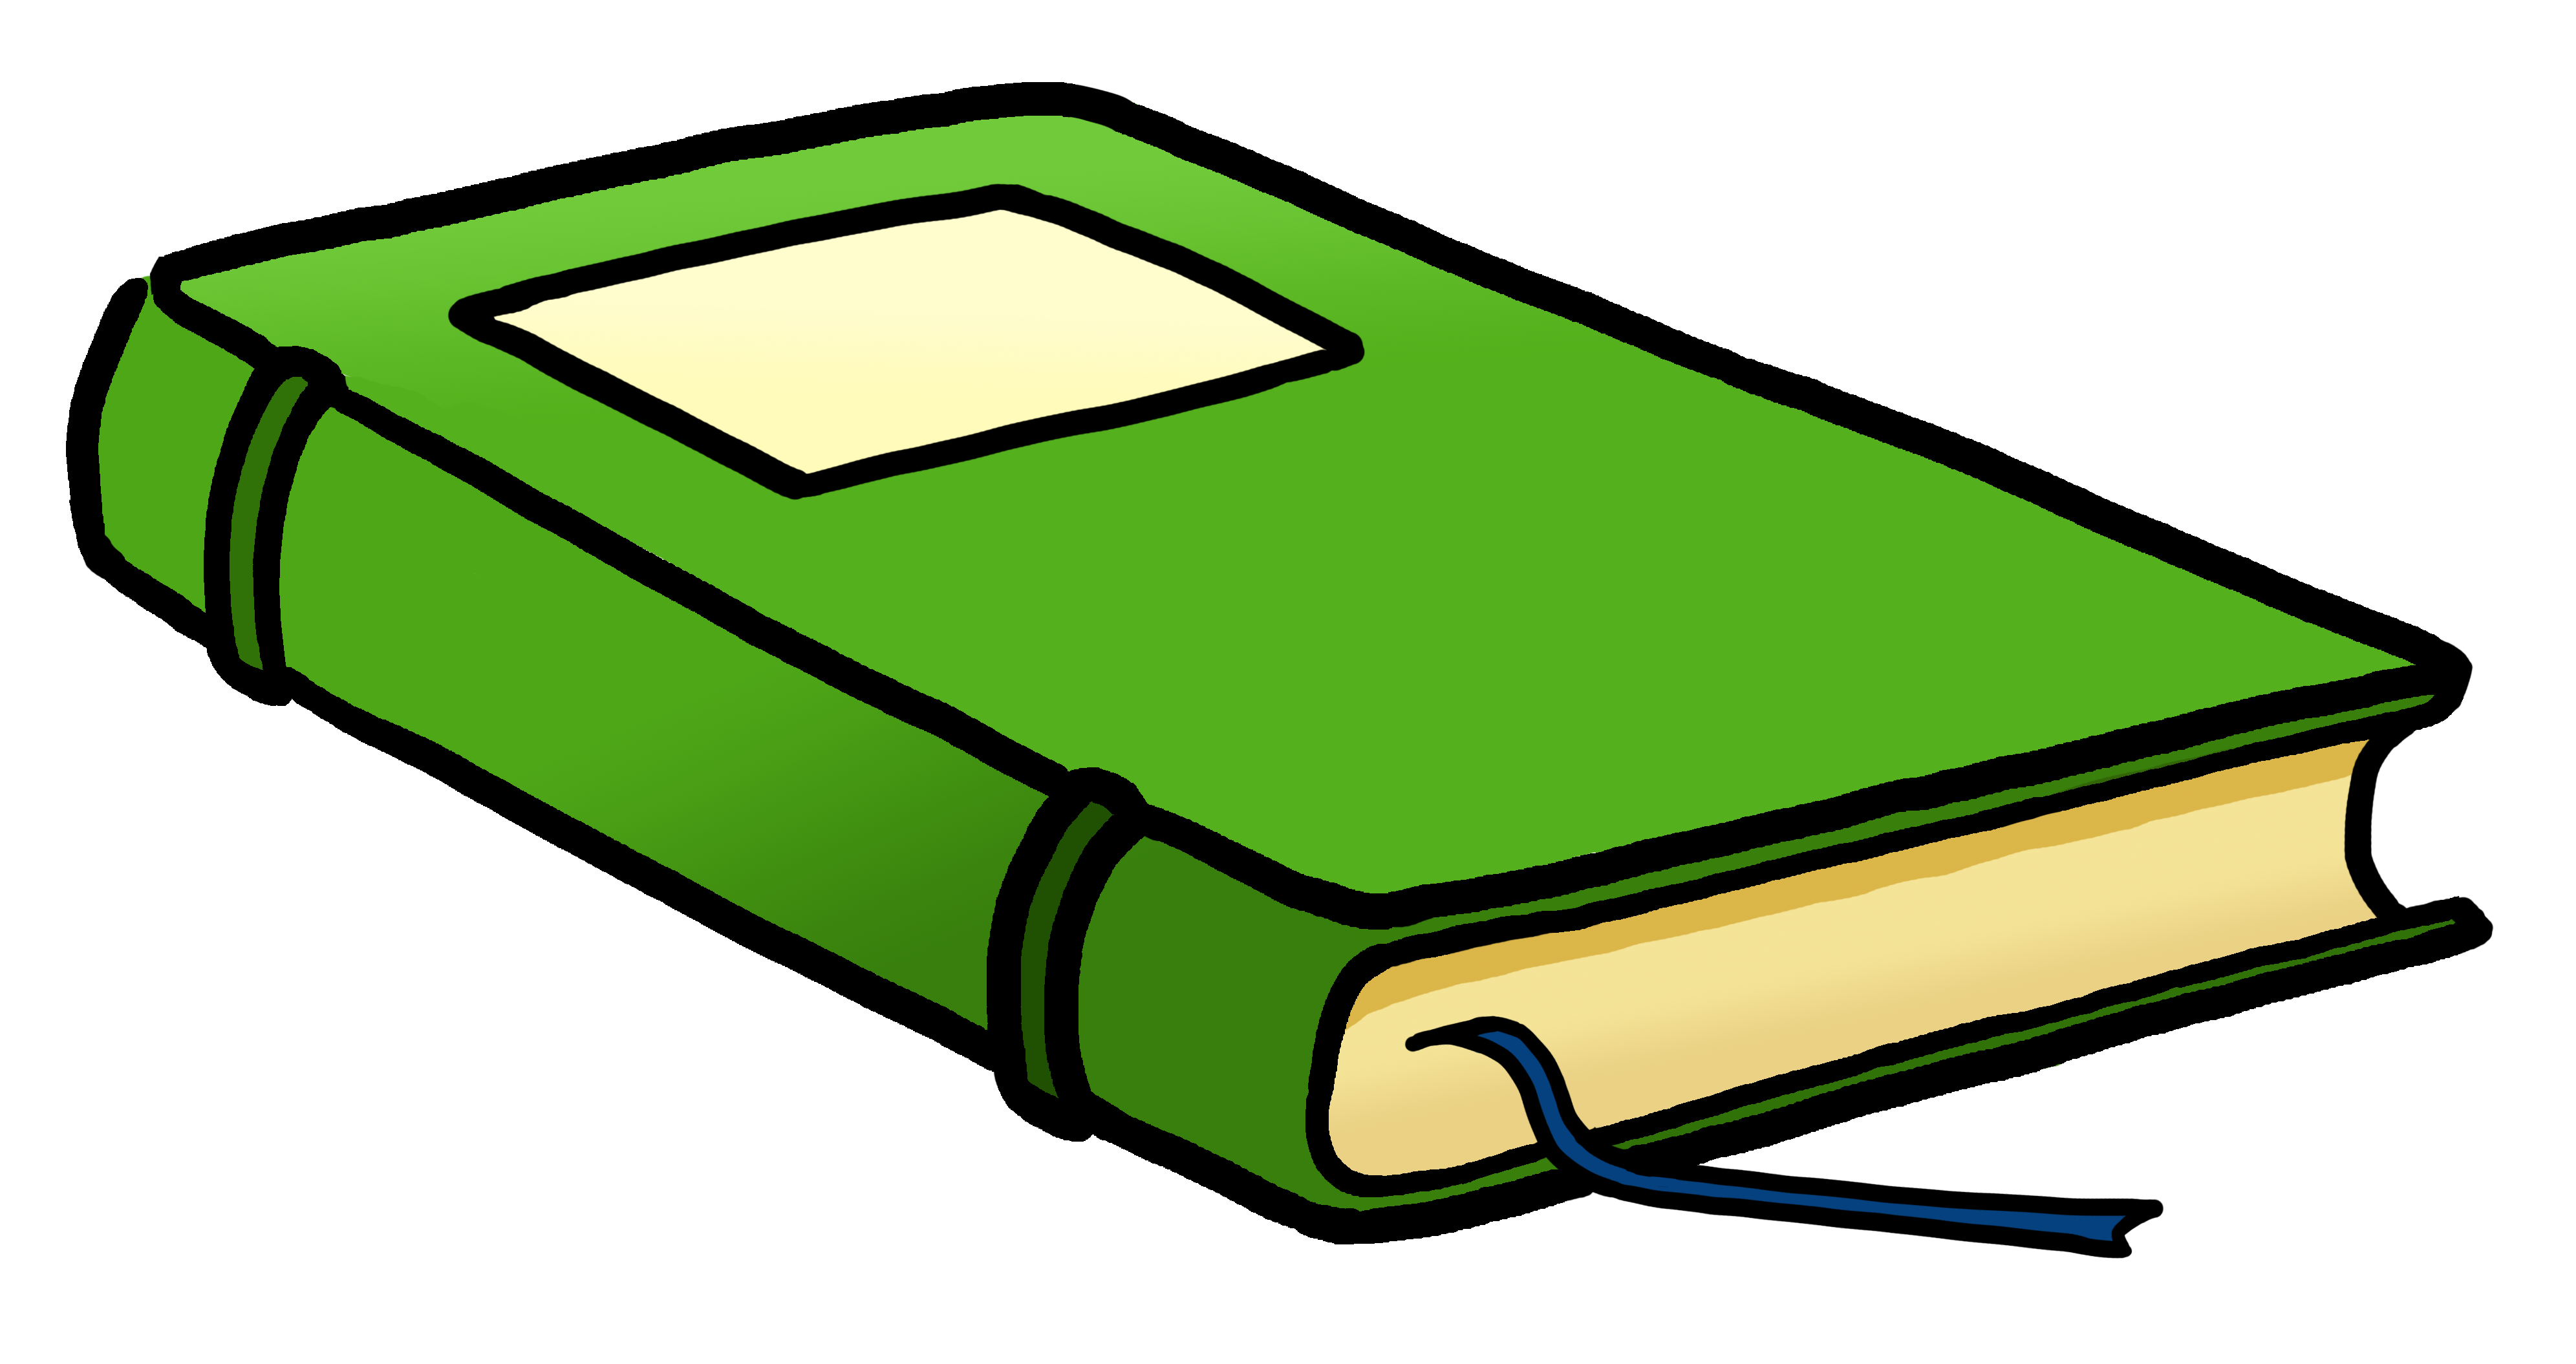 clipart images of books - photo #23